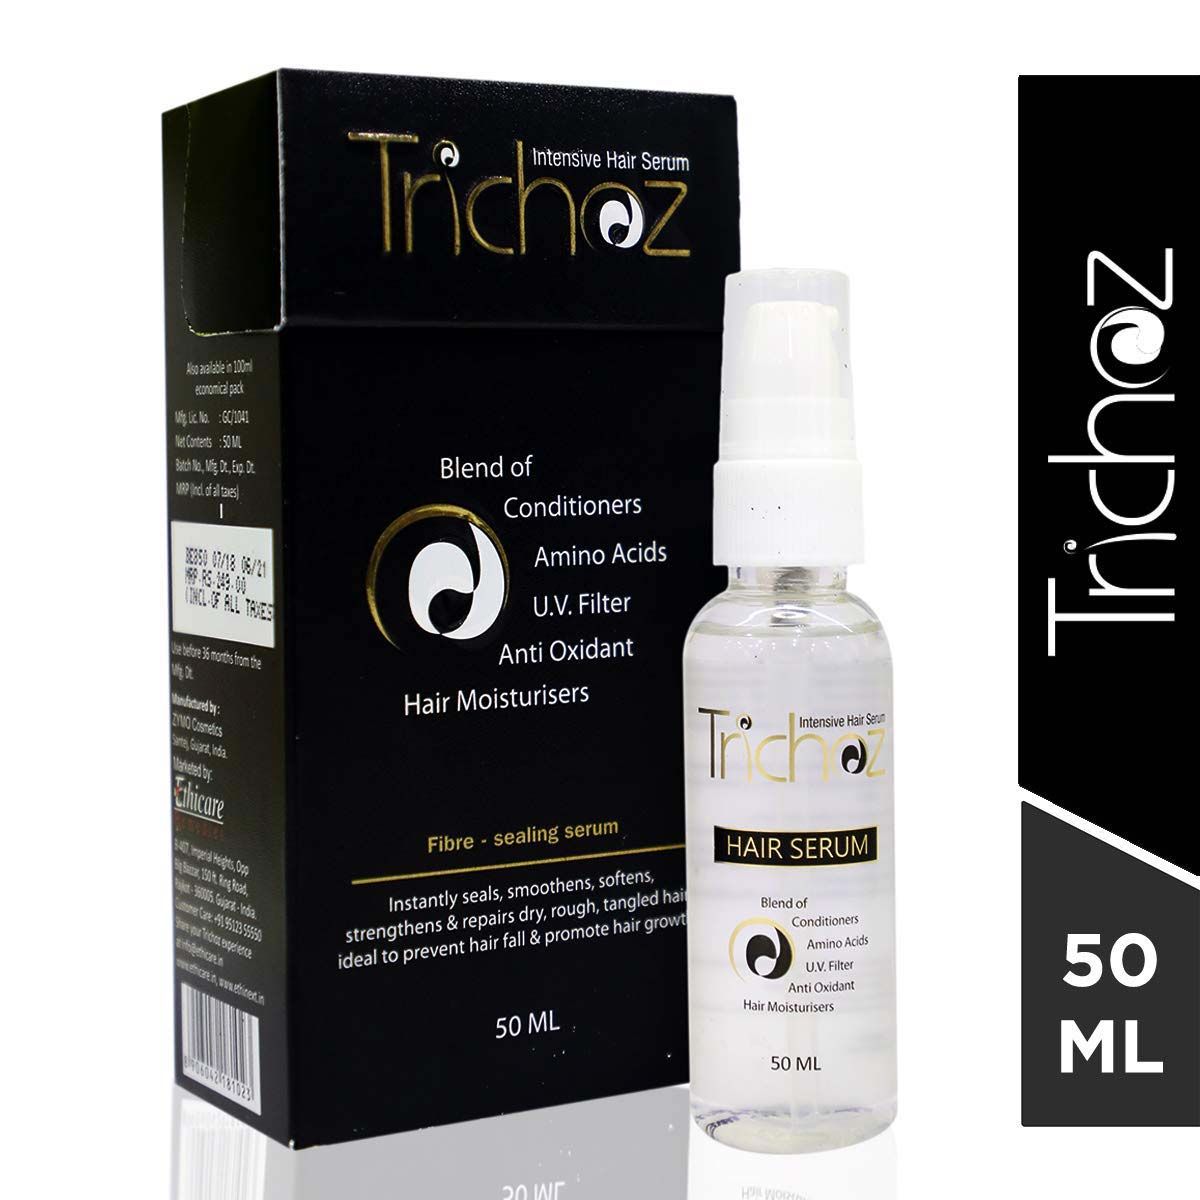 Trichoz Hair Serum, 50 ml Price, Uses, Side Effects, Composition - Apollo  Pharmacy